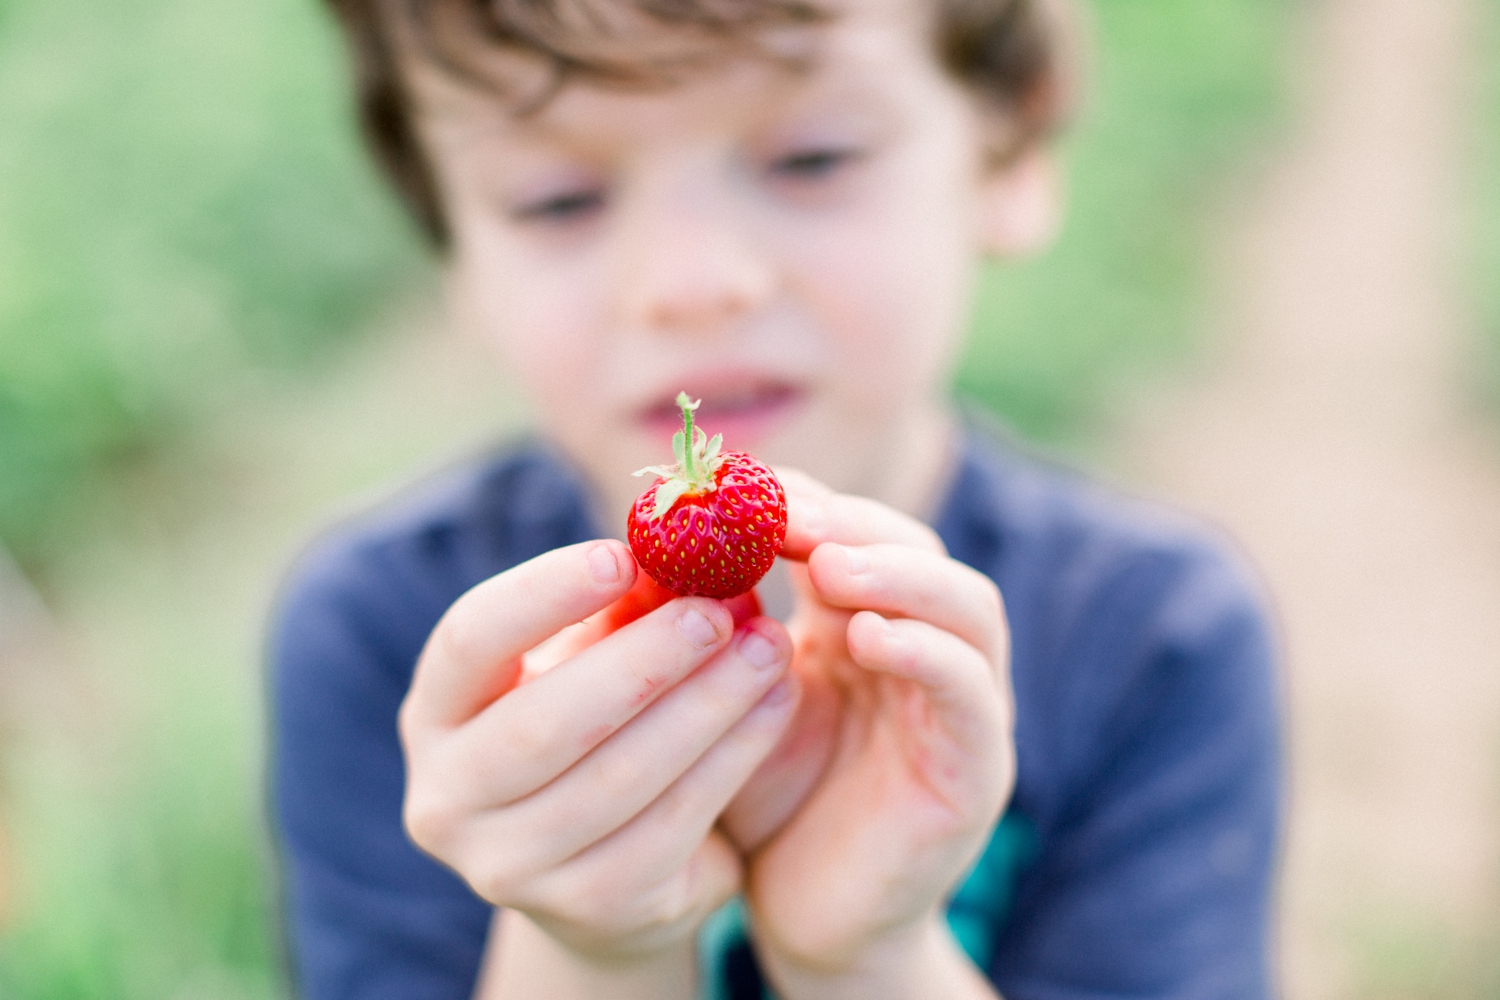 Cover photo for blog post about strawberry picking at Wilfert Farms in Wisconsin.